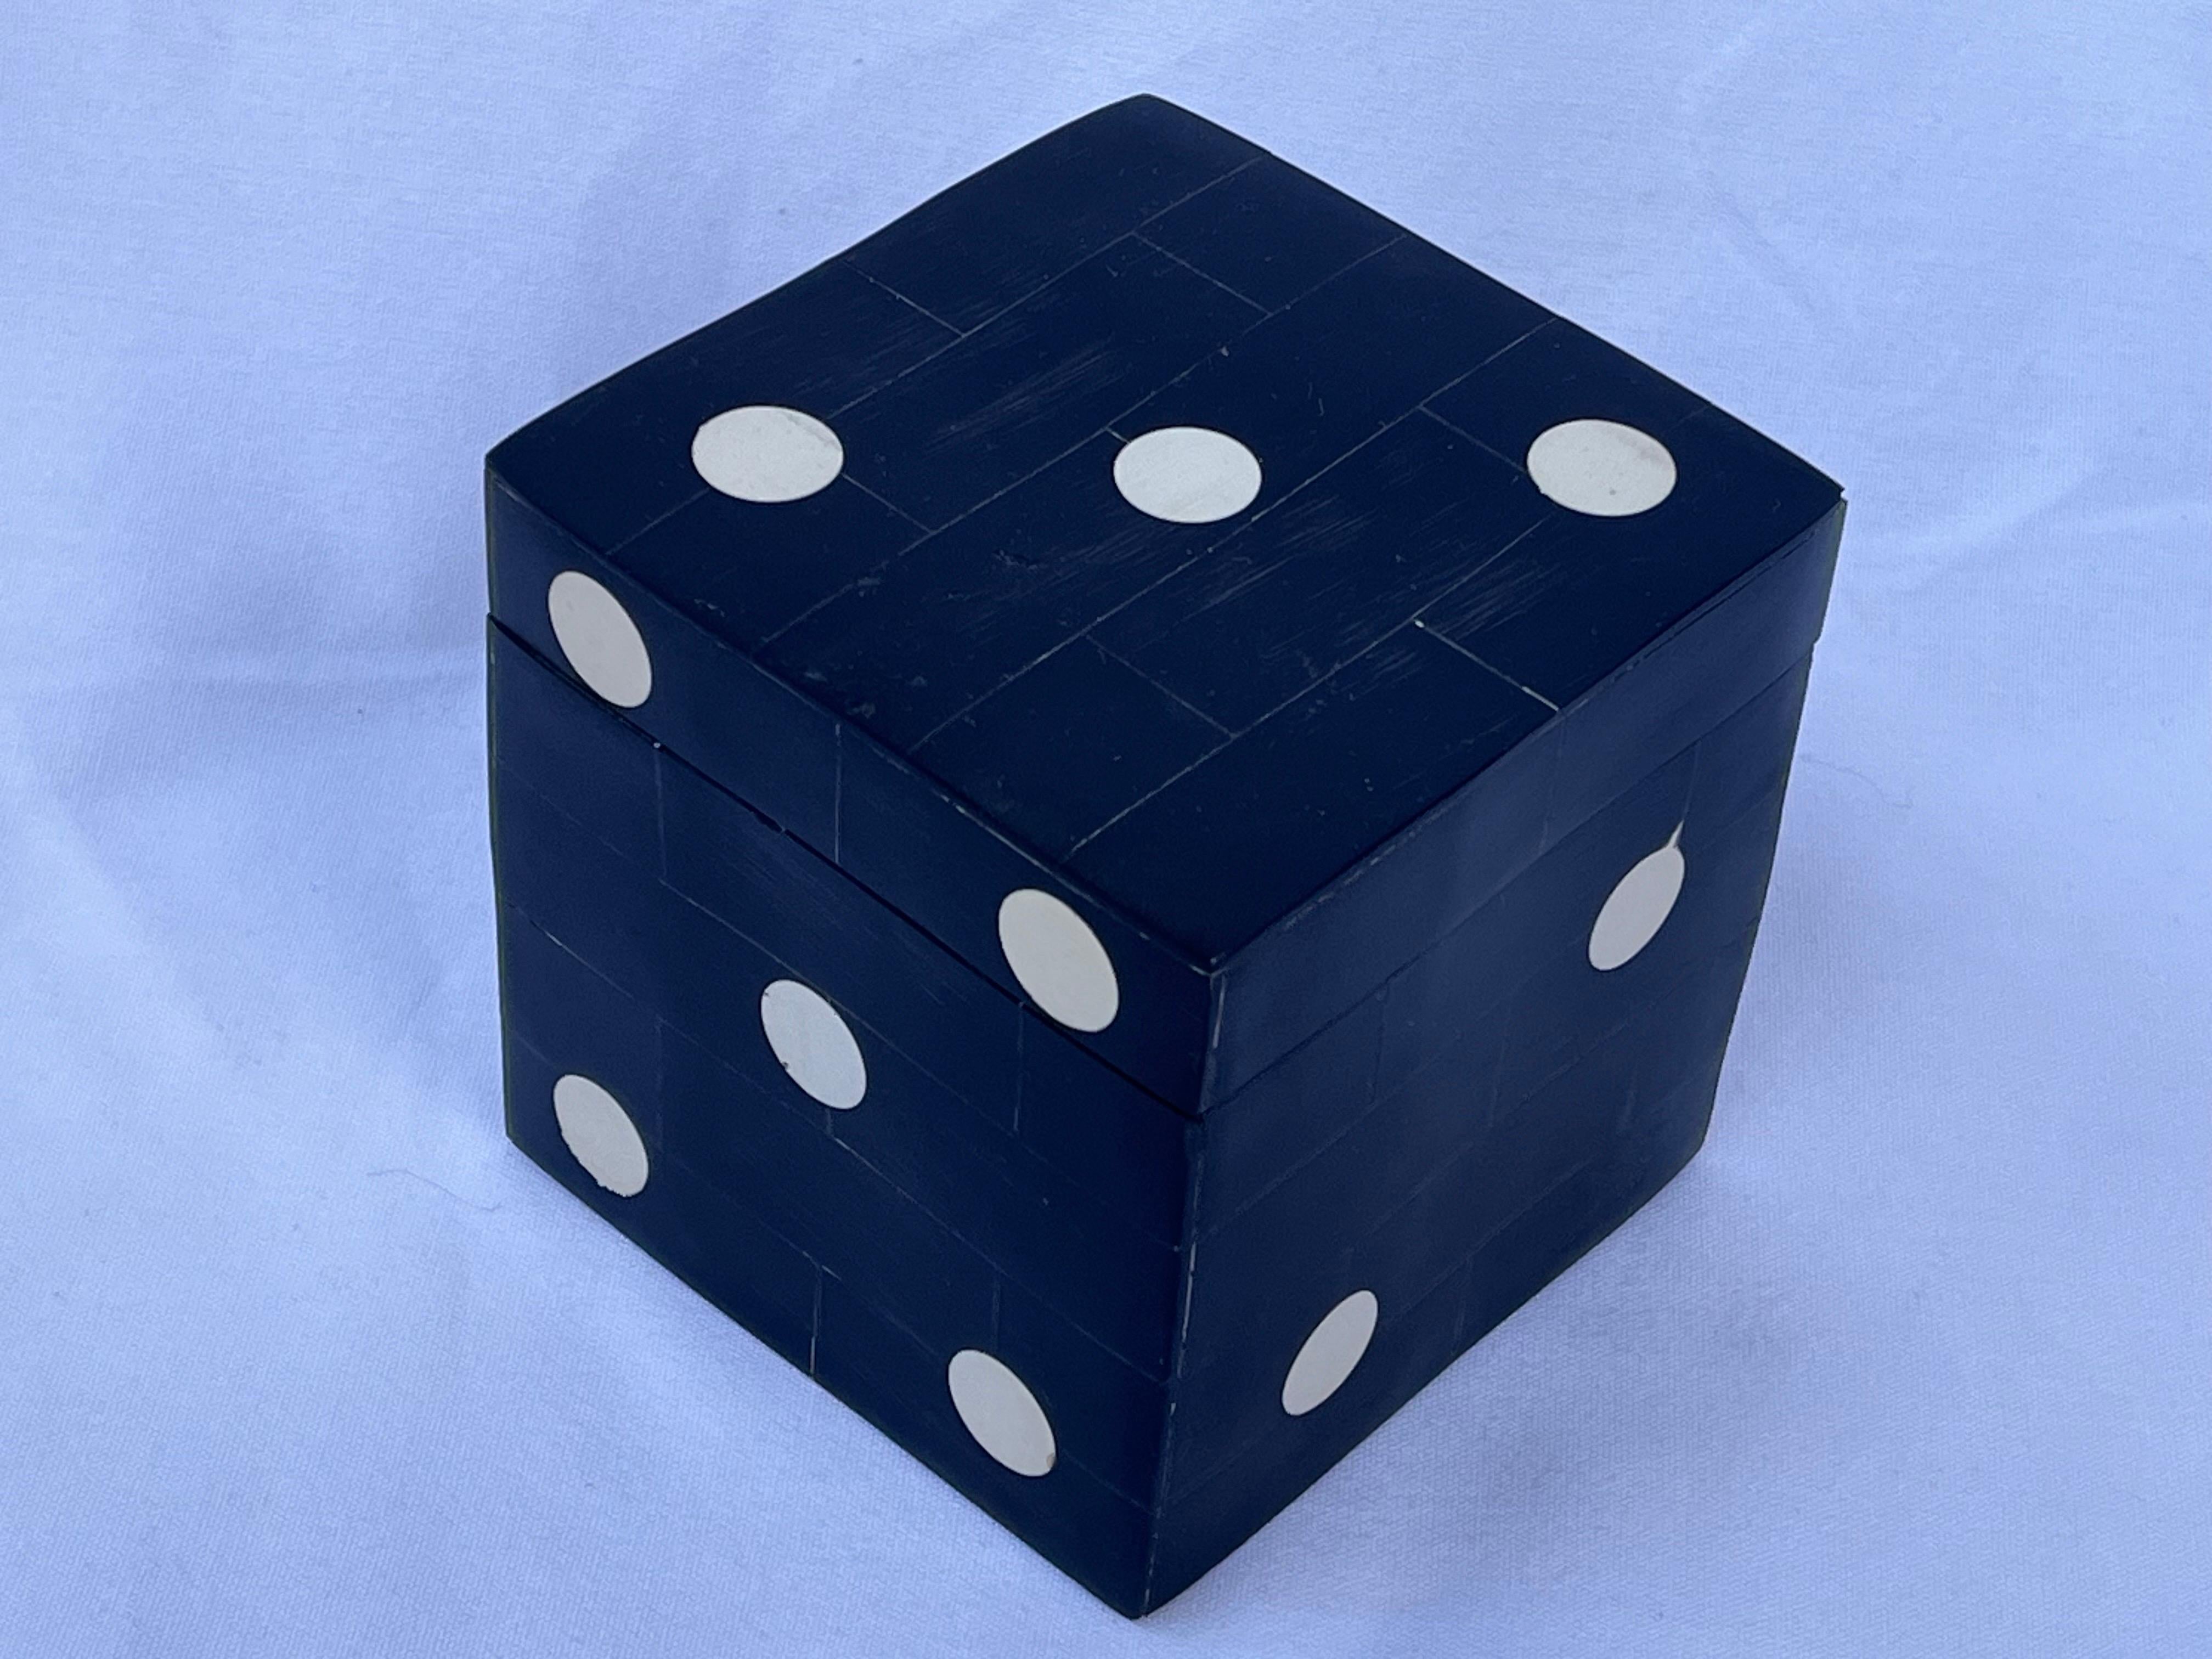 Are you feeling lucky? Then roll this die. Luck be a lady tonight. This beautifully crafted tessellated dyed bone lidded box perfectly emulates the titillation of rolling the dice, taking those chances and reaping those rewards. The stylized die /